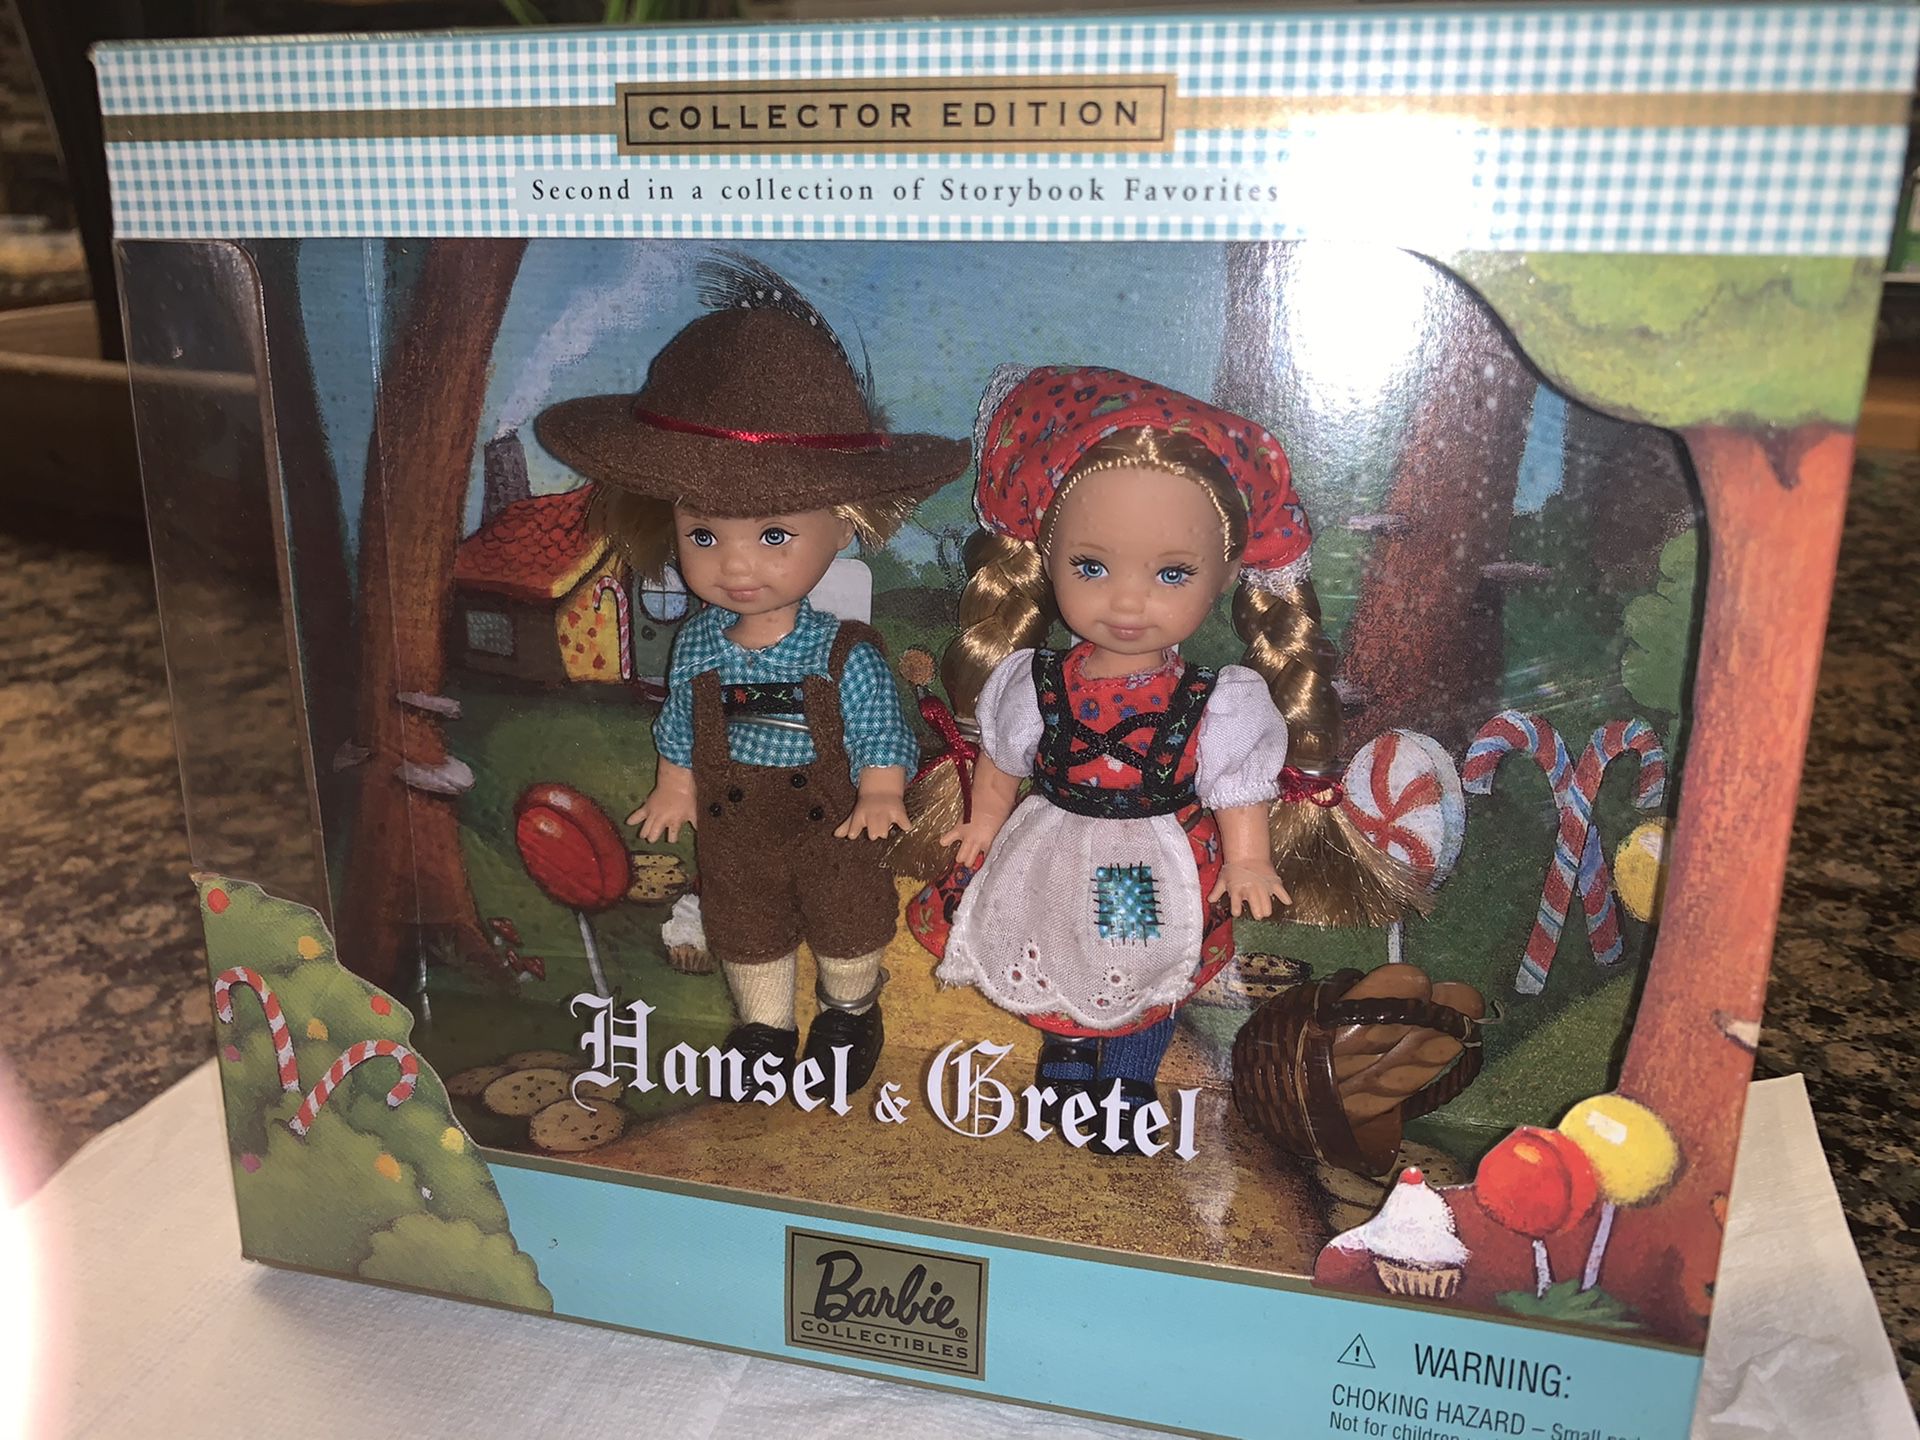 BARBIE "STORYBOOK COLLECTION" TOMMY & KELLY AS HANSEL AND GRETEL - NRFB